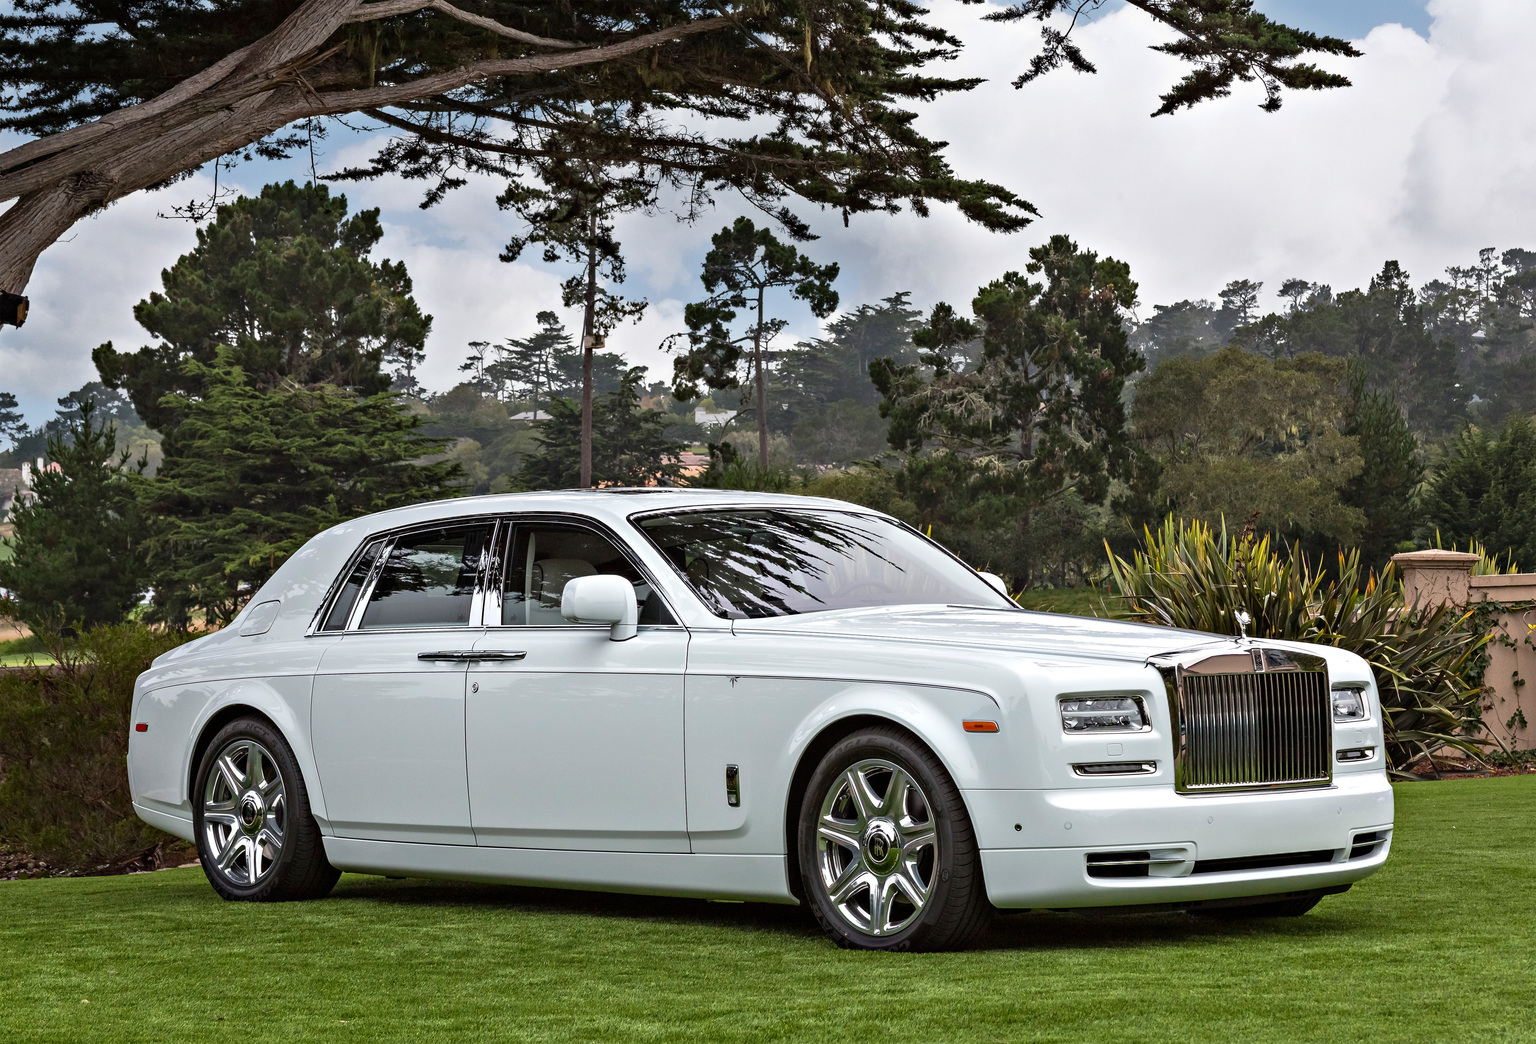 Car Rolls Royce Luxury Cars British Cars White Cars Frontal View Grass Trees Sky Clouds Vehicle 1536x1044